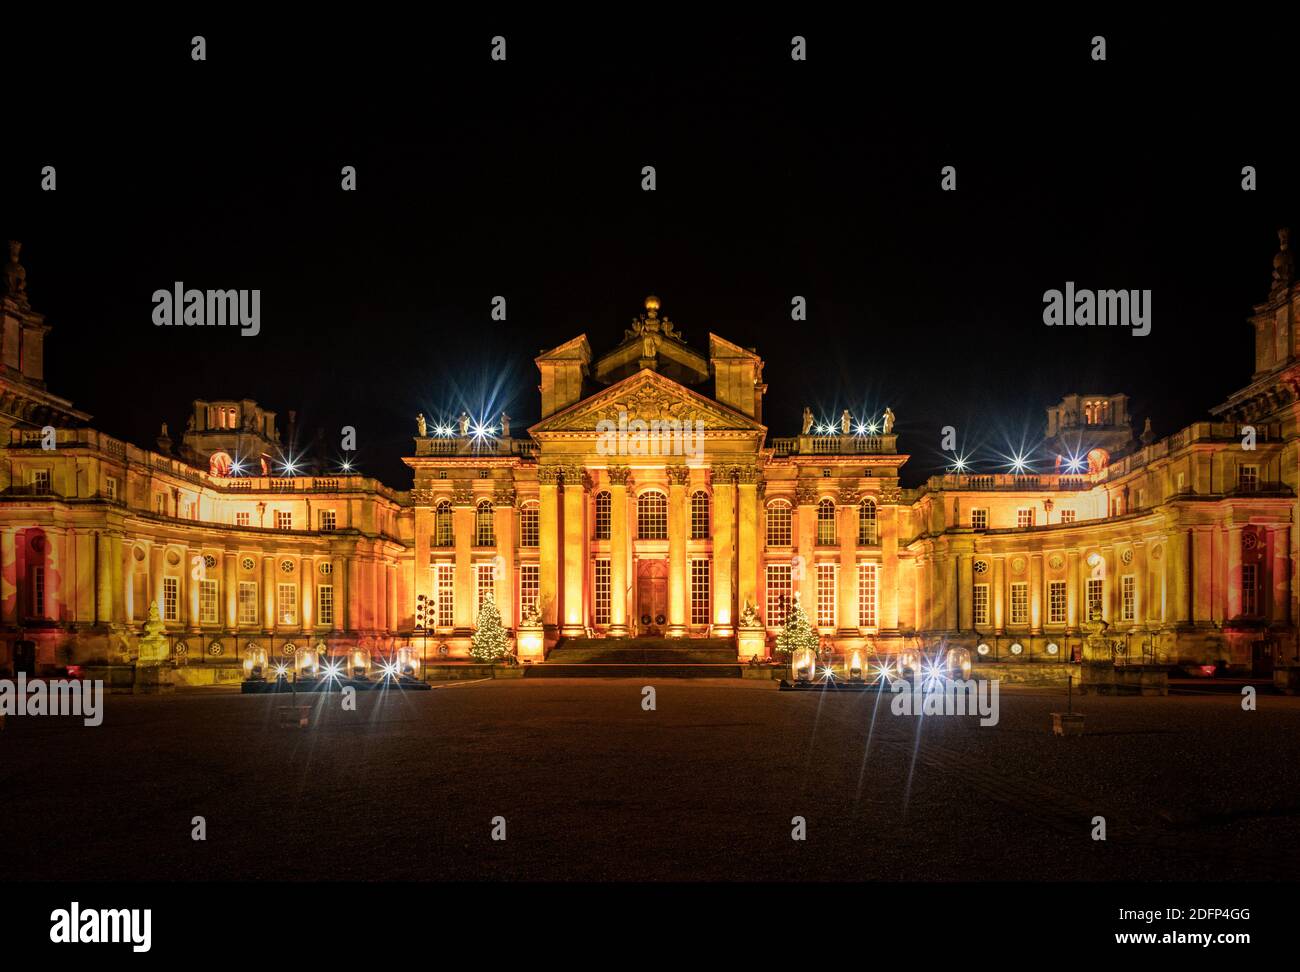 Blenheim Palace illuminated for Christmas as part of the Blenheim Christmas lights trail. Stock Photo